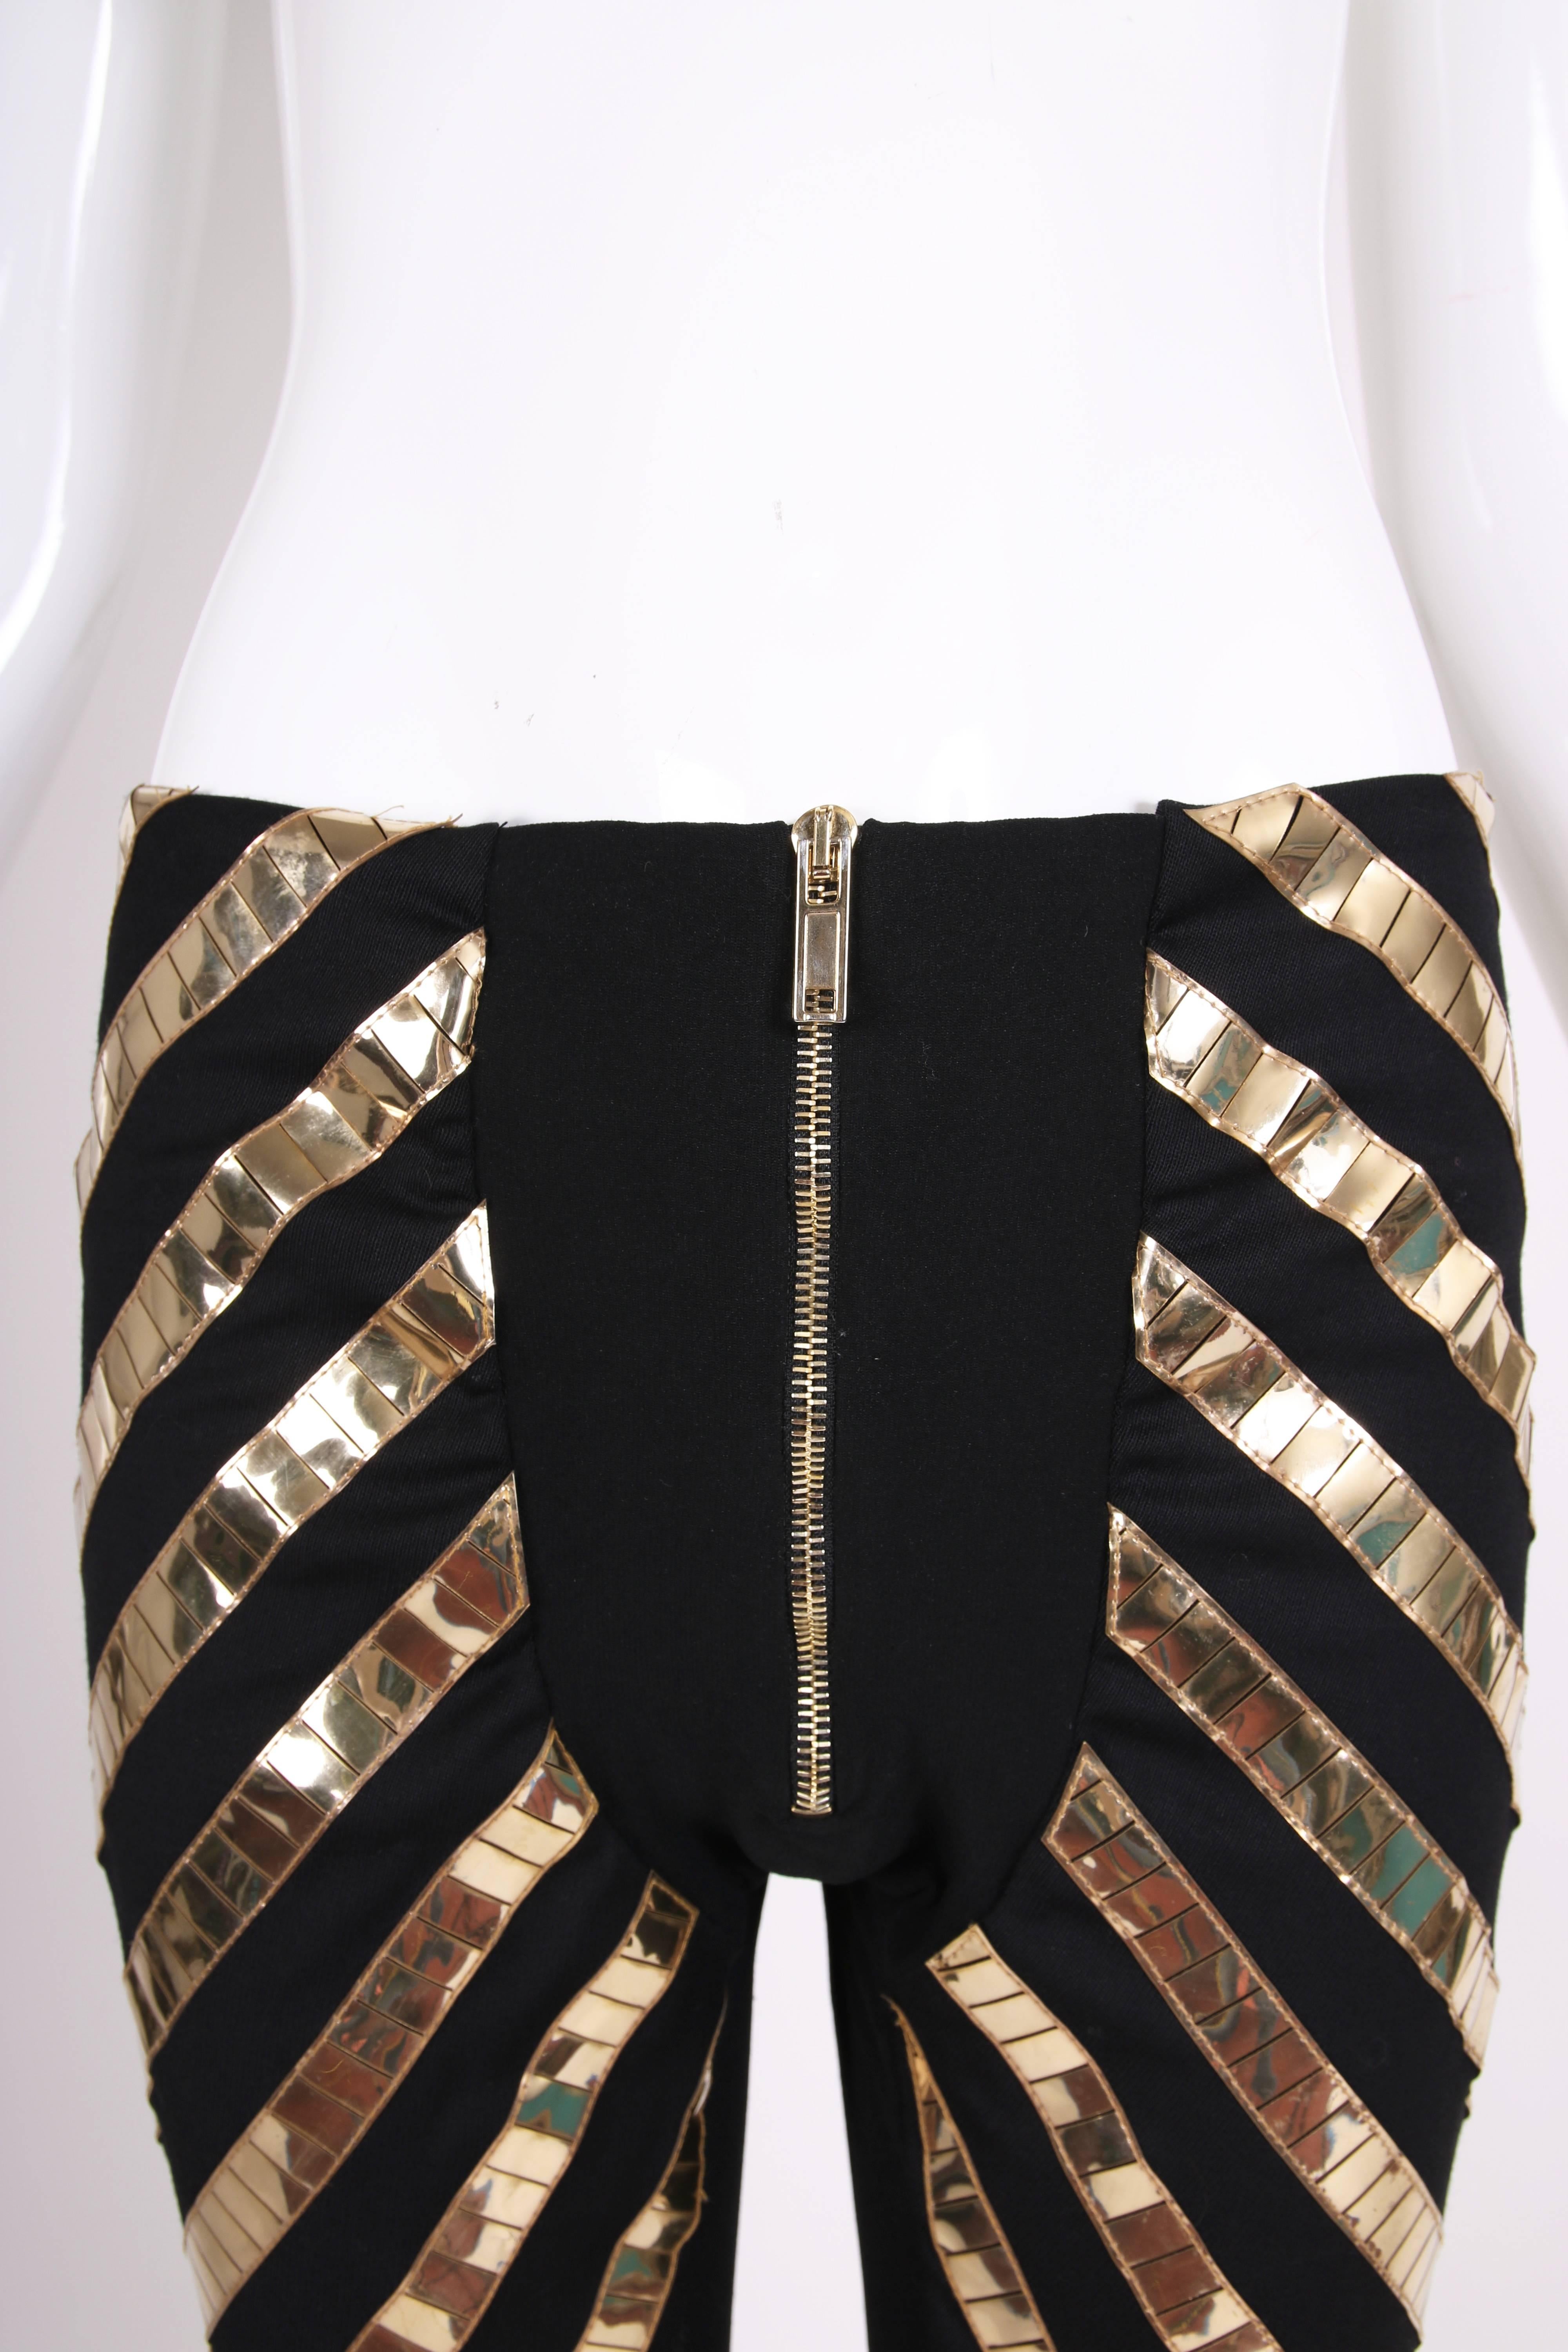 2011 Gareth Pugh Gold and Black Stretch Pants with Zippers at Ankle 1